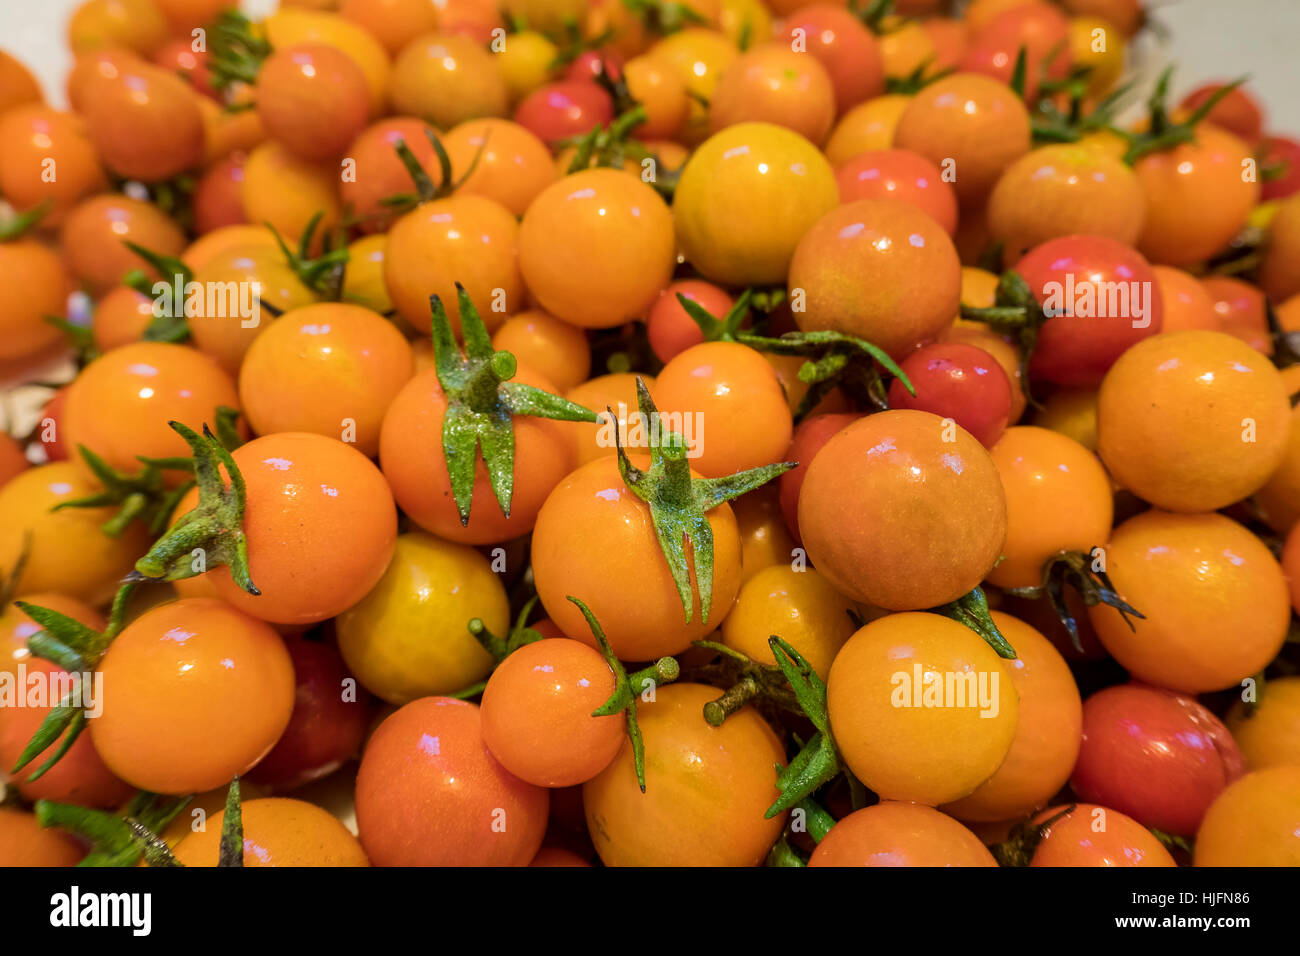 Big harvest of tomato in home garden at Los Angeles Stock Photo